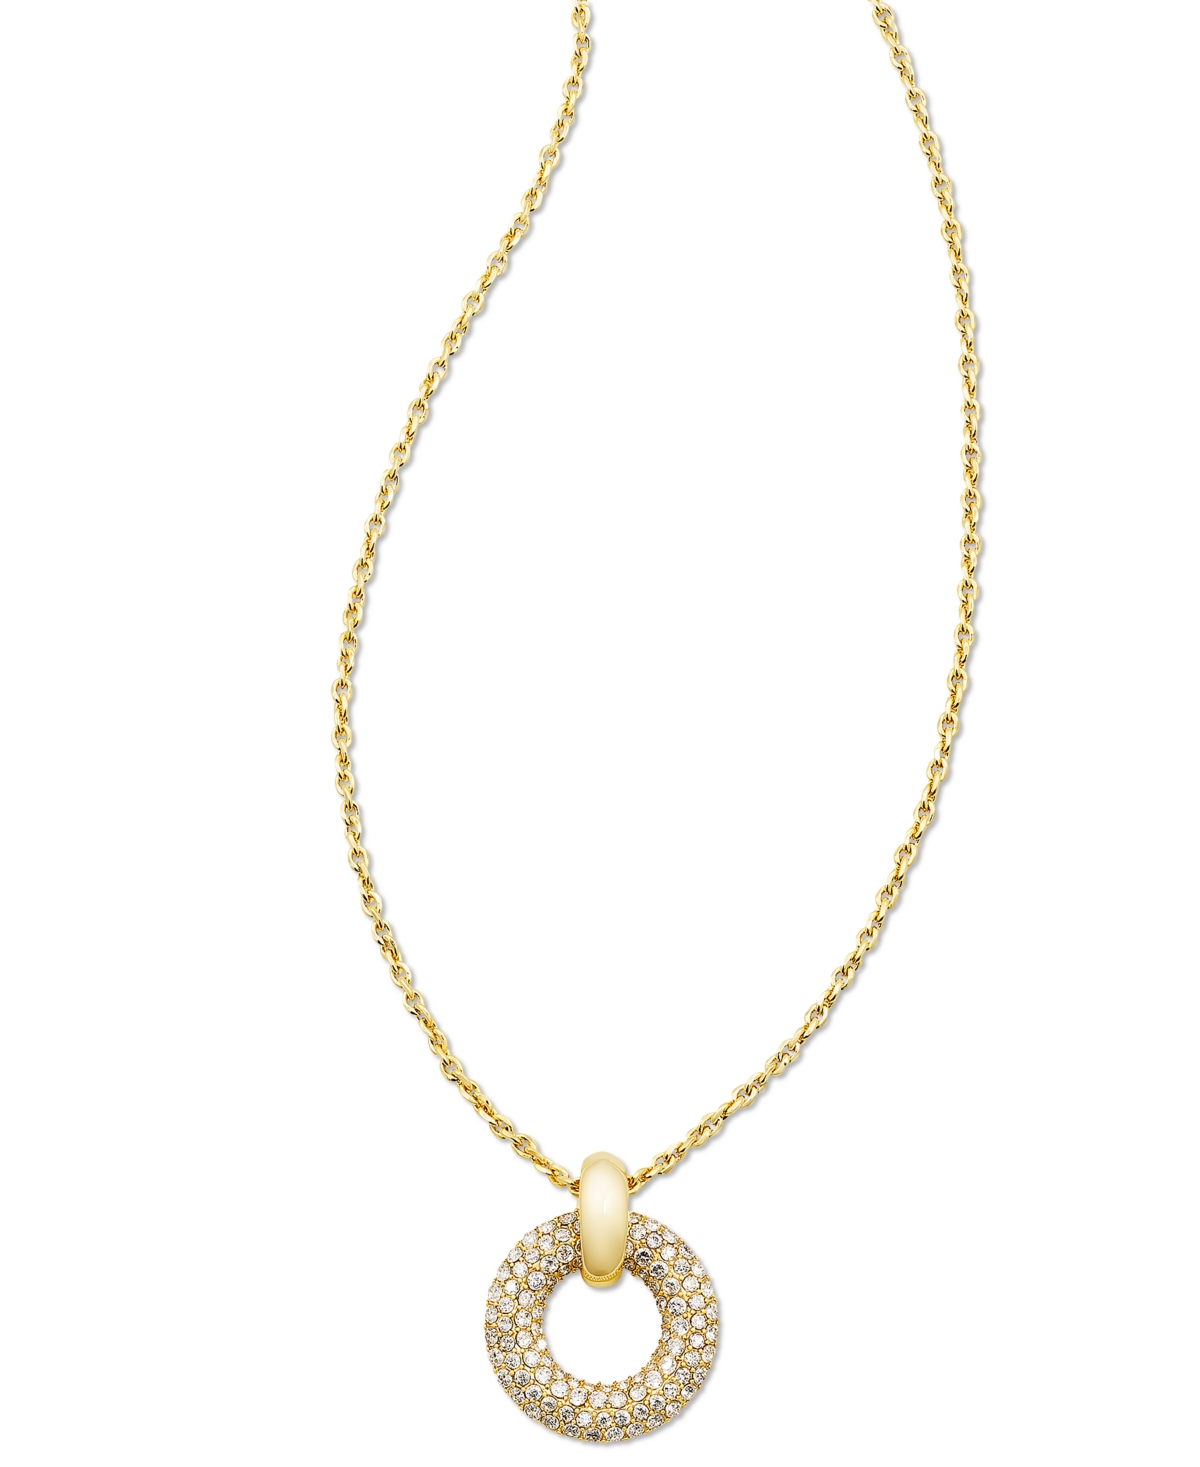 Kendra Scott Mikki Ombre Pave Short Pendant Necklace In 14k Gold Plated, 19 In White Cz